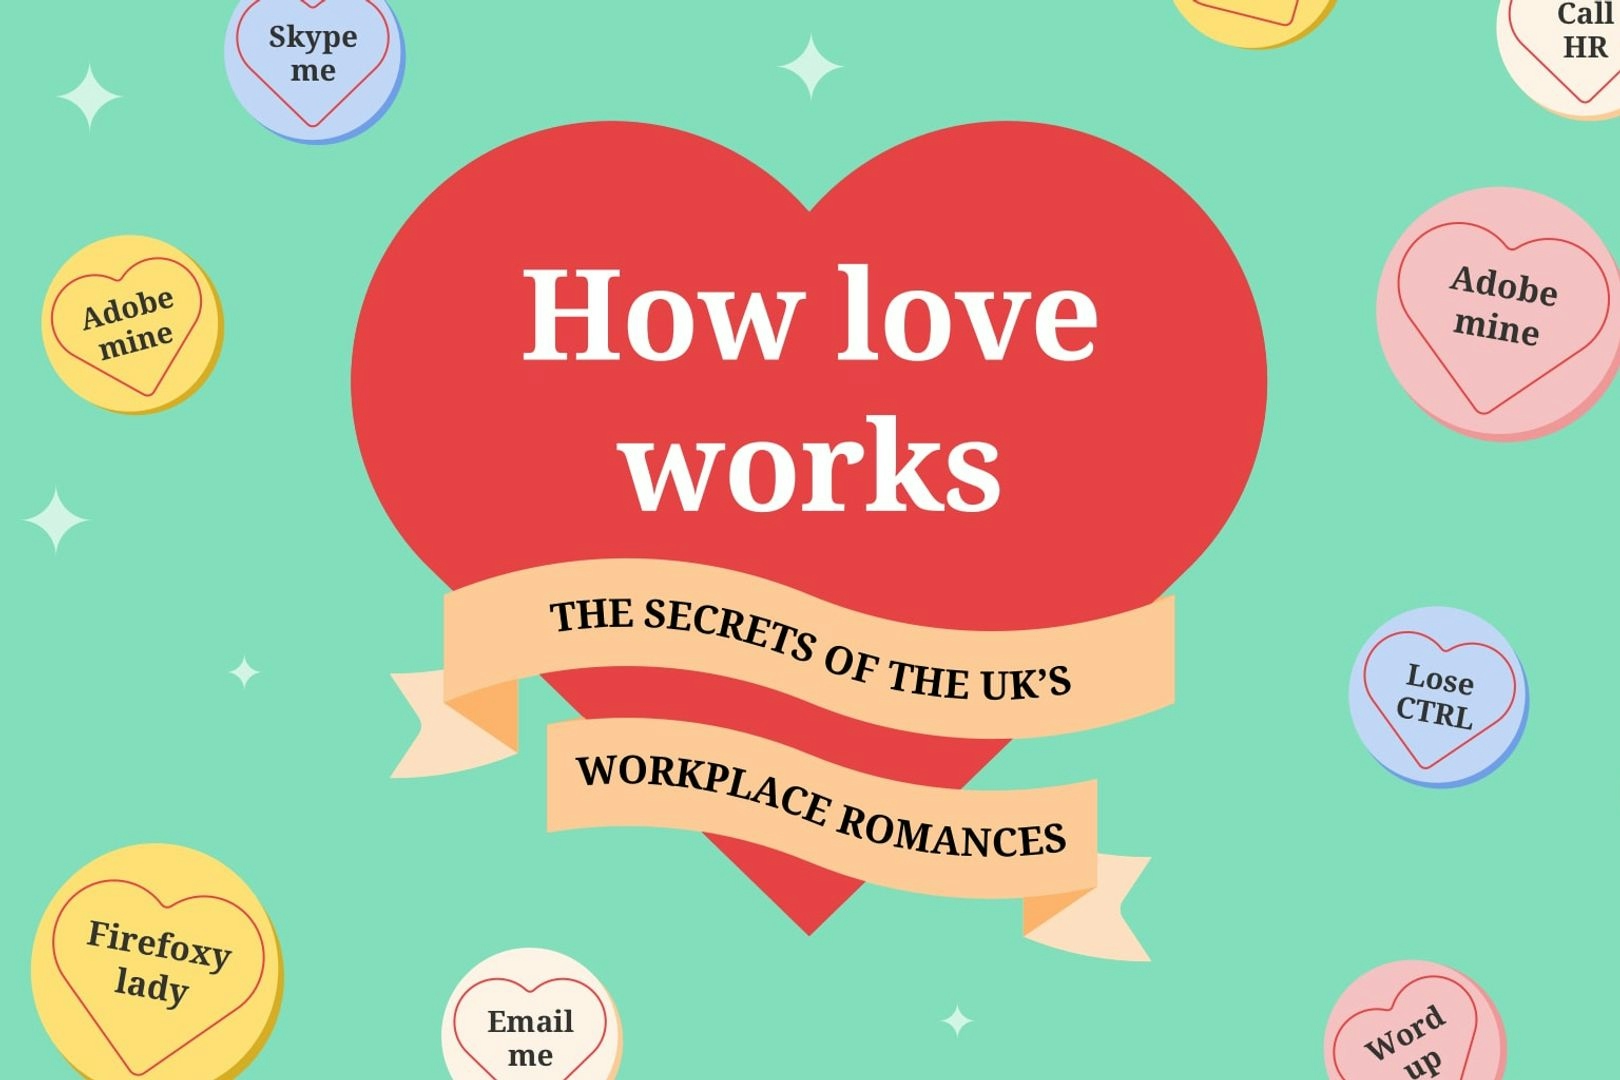 A bright and colourful banner with a large red love heart in the middle, surrounded by smaller love hearts in the shape of the popular candy of the same name. The red love heart contains the title 'How love works' and the subtitle 'The secrets of the UK's workplace romances'. The surrounding love hearts contain workplace romance puns like 'Firefoxy lady' and 'U Excel'.